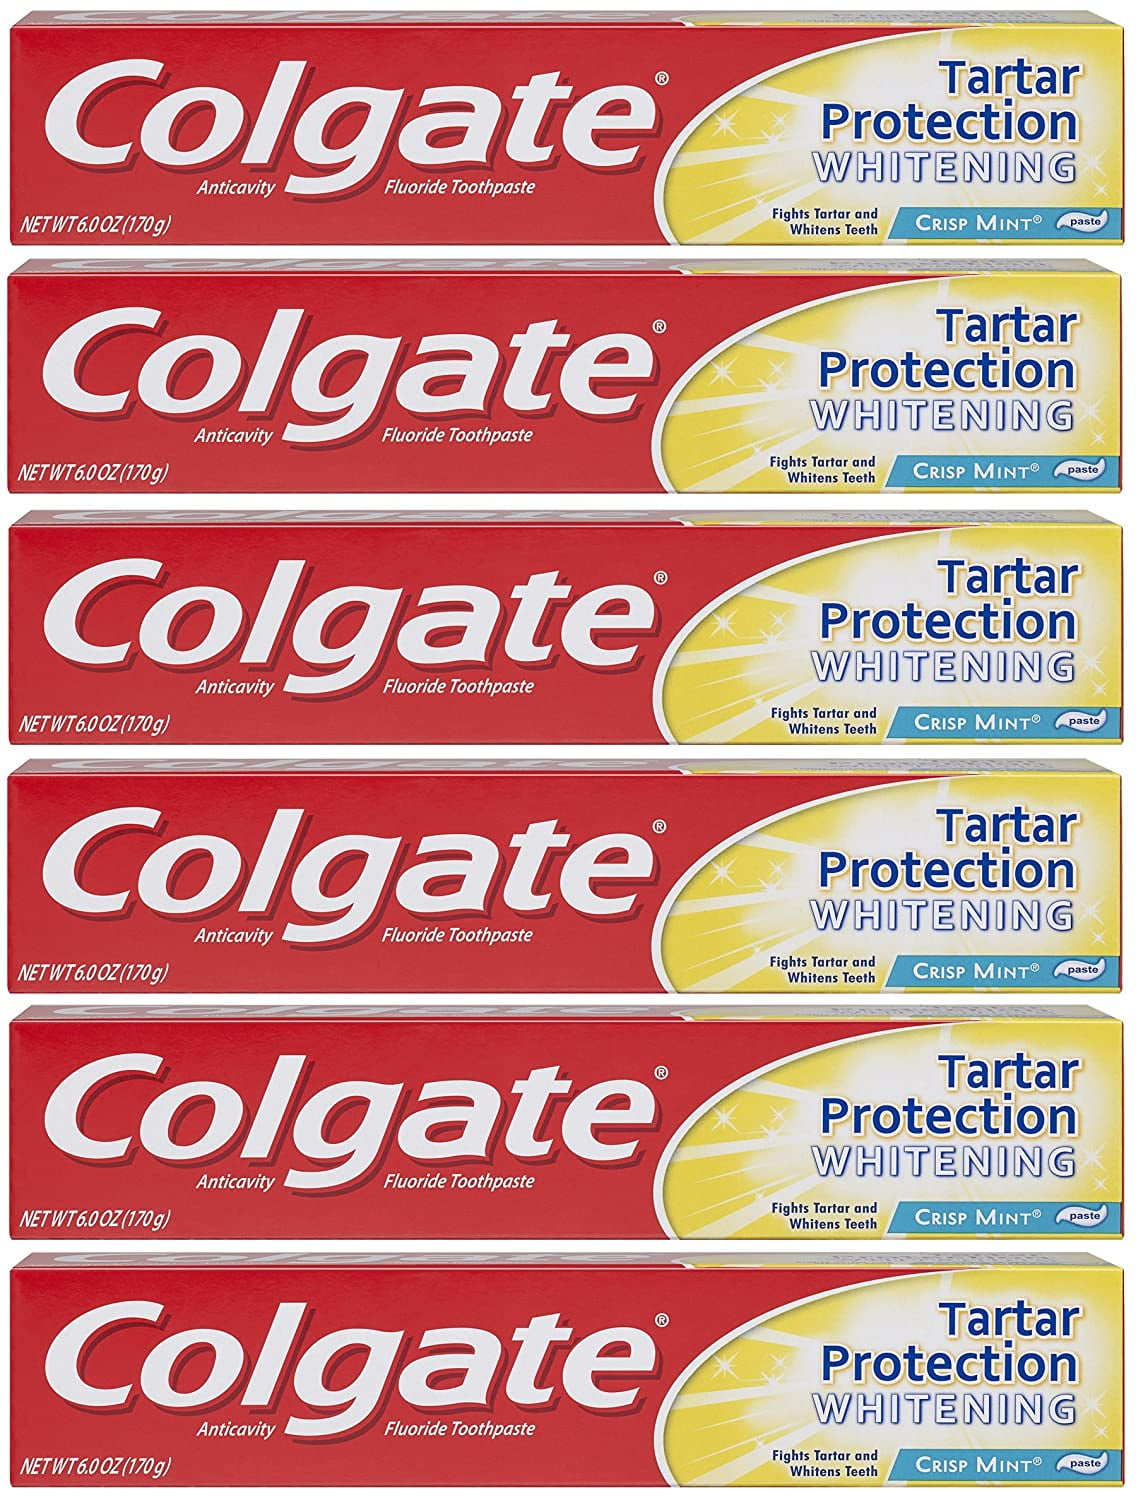 Colgate Tartar Control Whitening Toothpaste, 2.5 Ounce, 6 pack